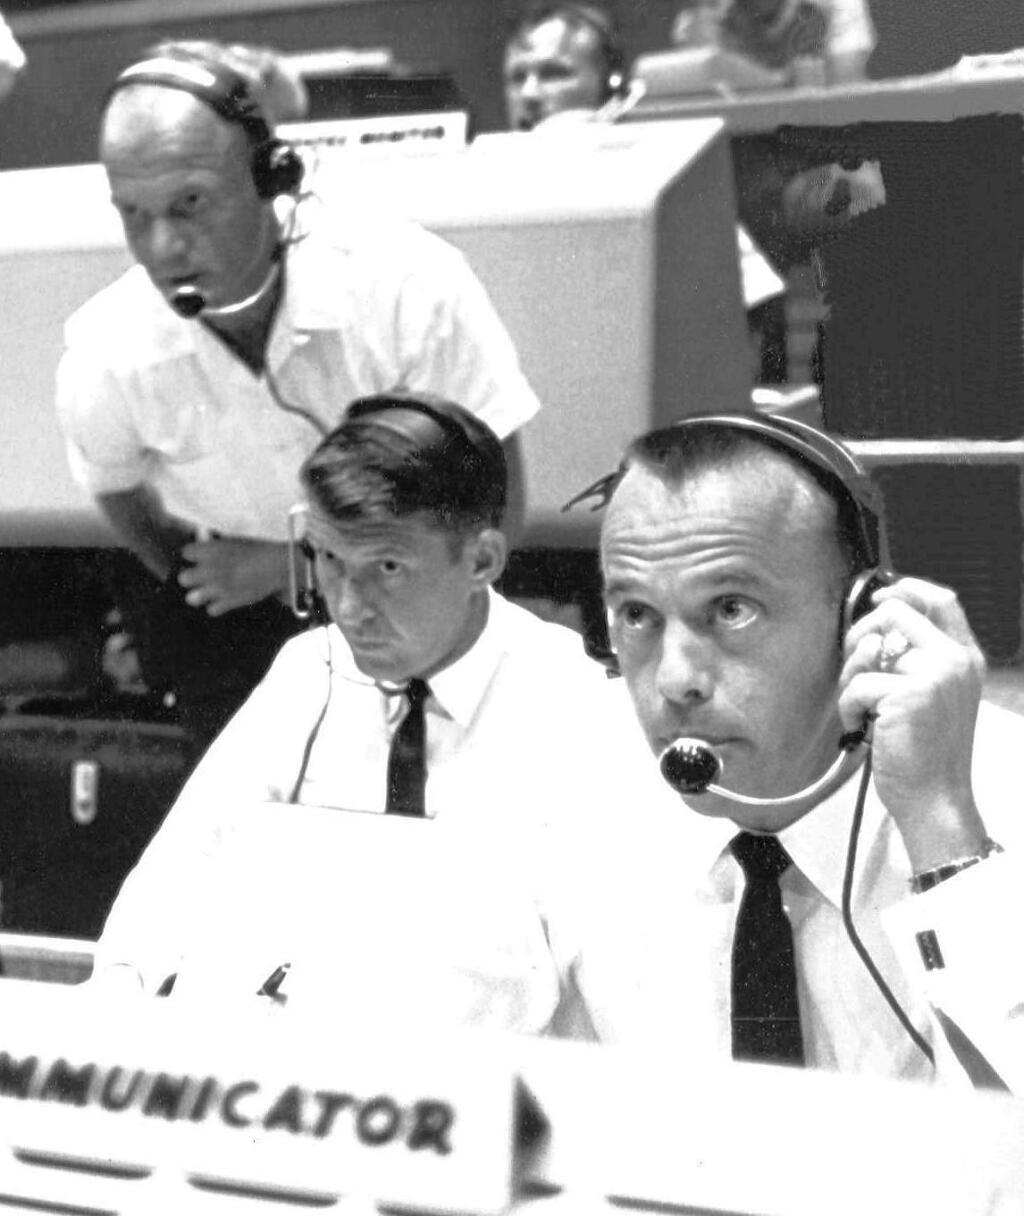 Controllers at Misson Control at NASA talk to Virgil Grissiom before the launch of Liberty Bell 7 July 21, 1961